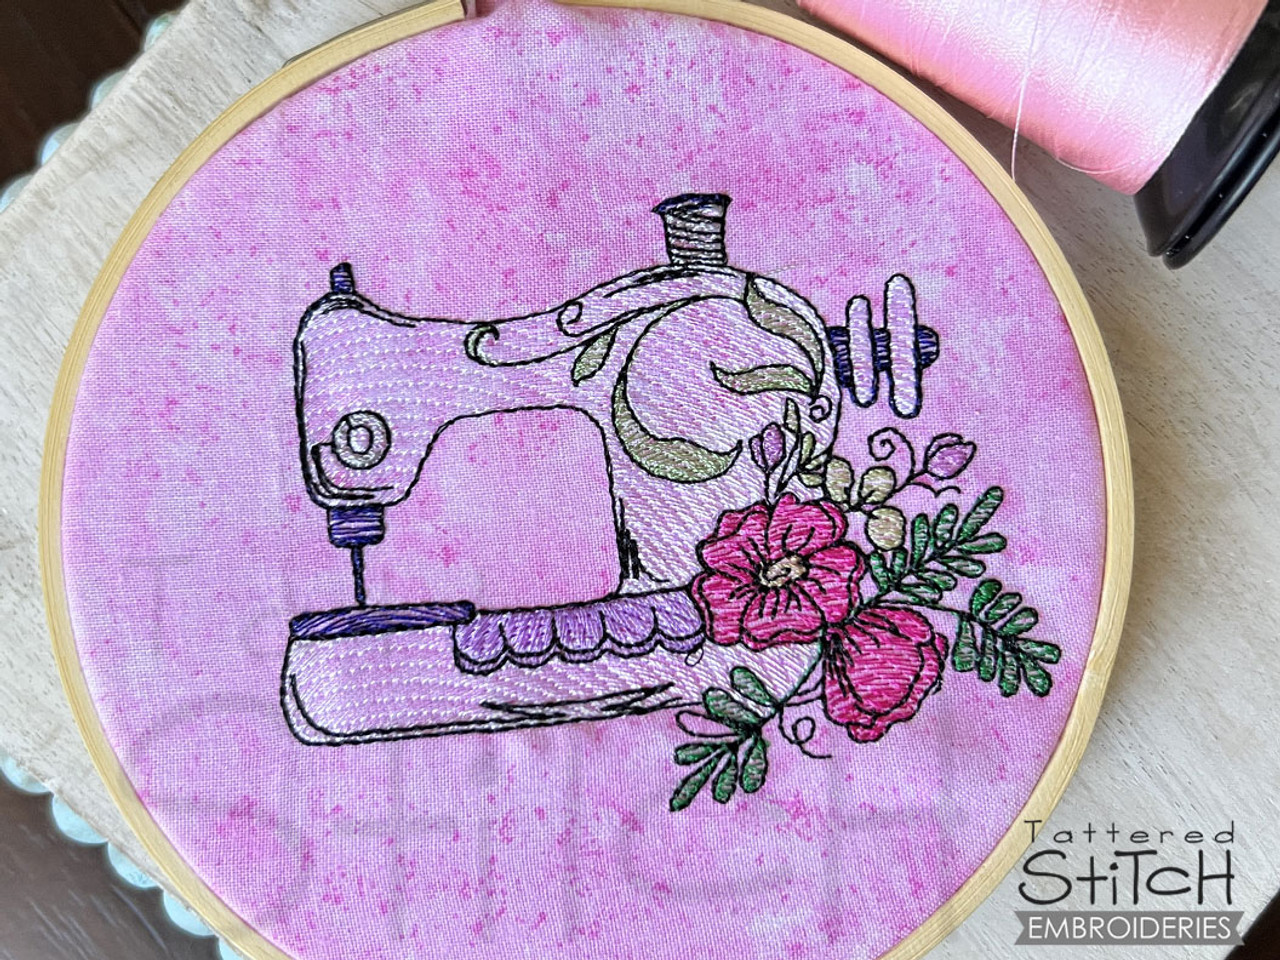 Sewing Notions Bundle - Machine Embroidery - Tattered Stitch Embroideries